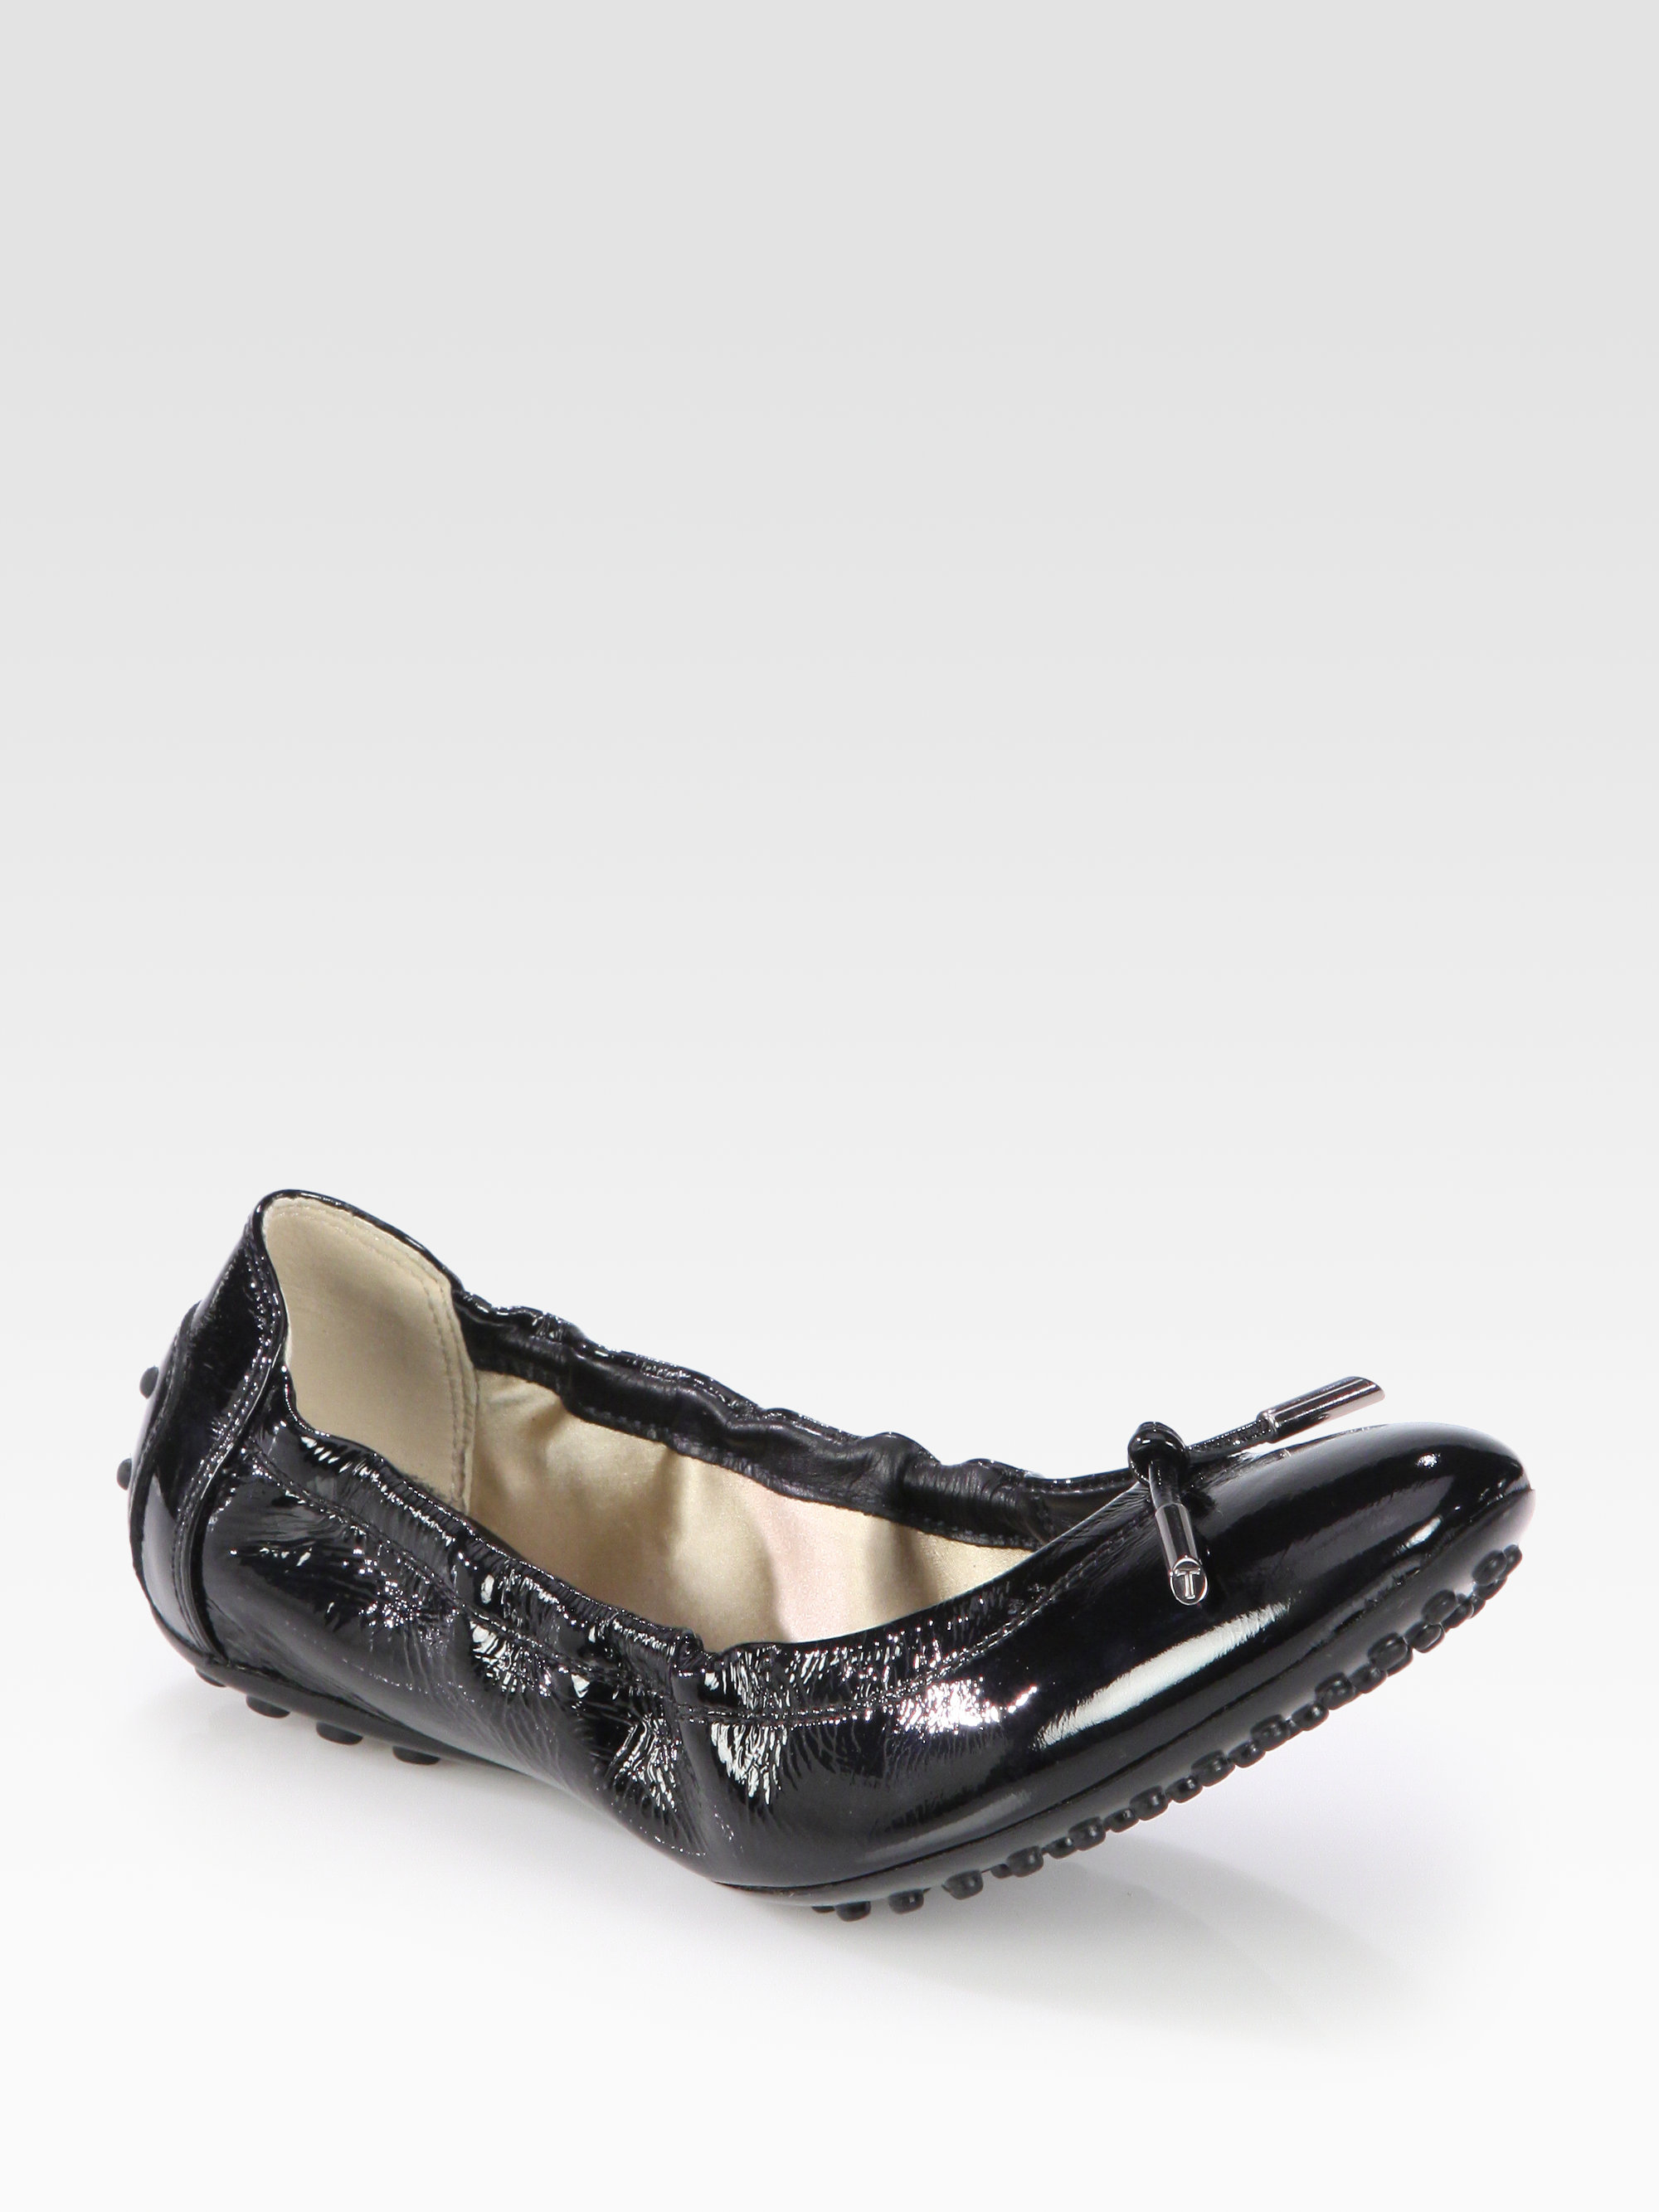 Lyst - Tod'S Patent Leather Ballet Flats in Black